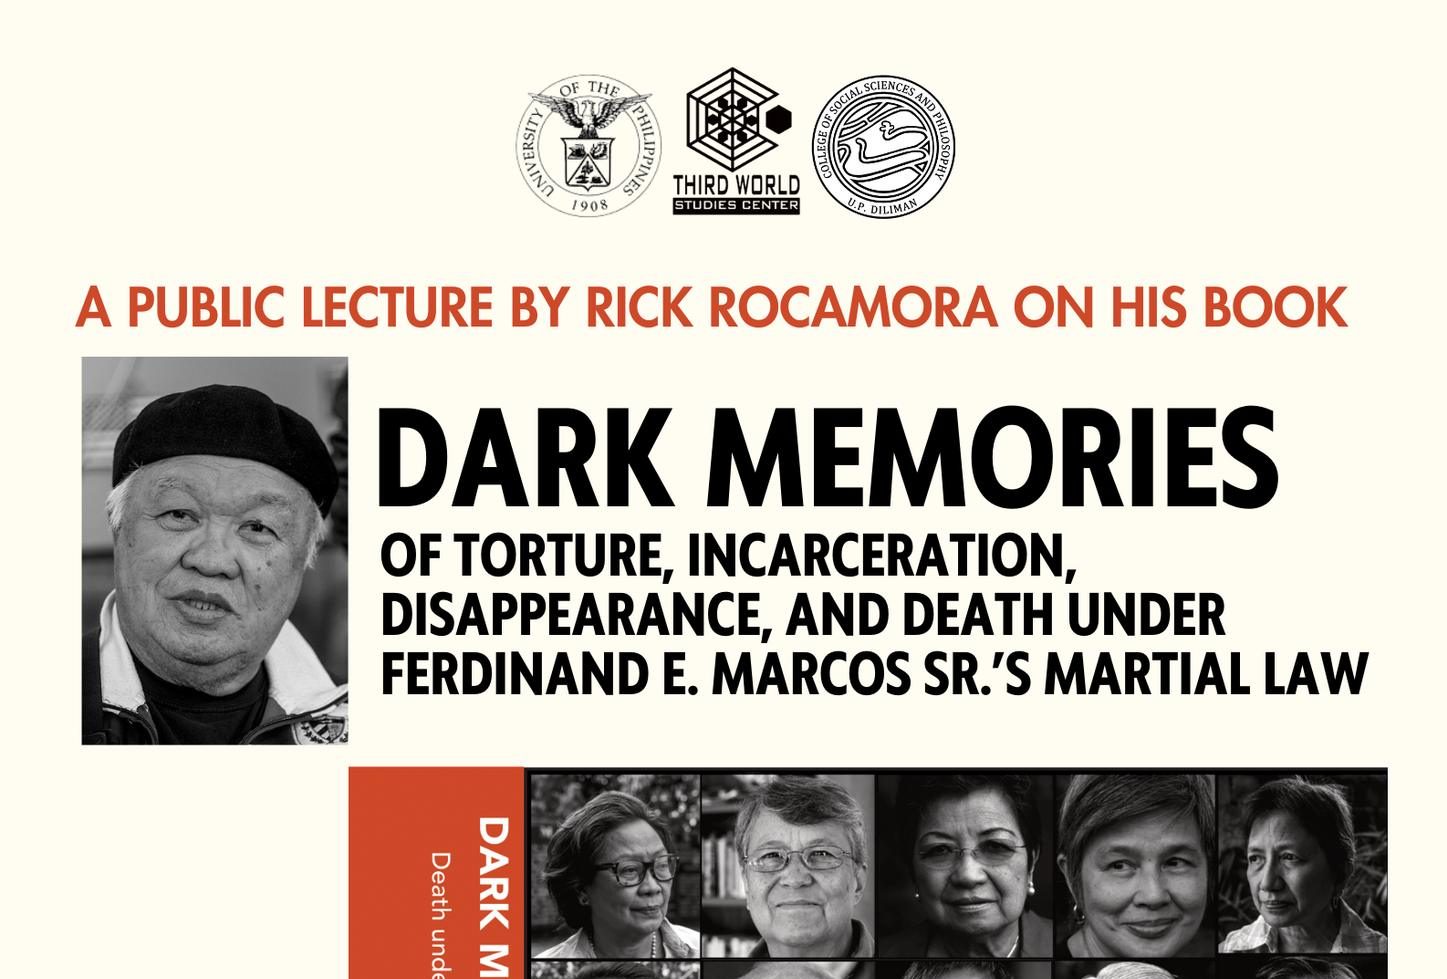 Dark Memories of Torture, Incarceration, Disappearance, and Death Under Ferdinand E. Marcos Sr.’s Martial Law